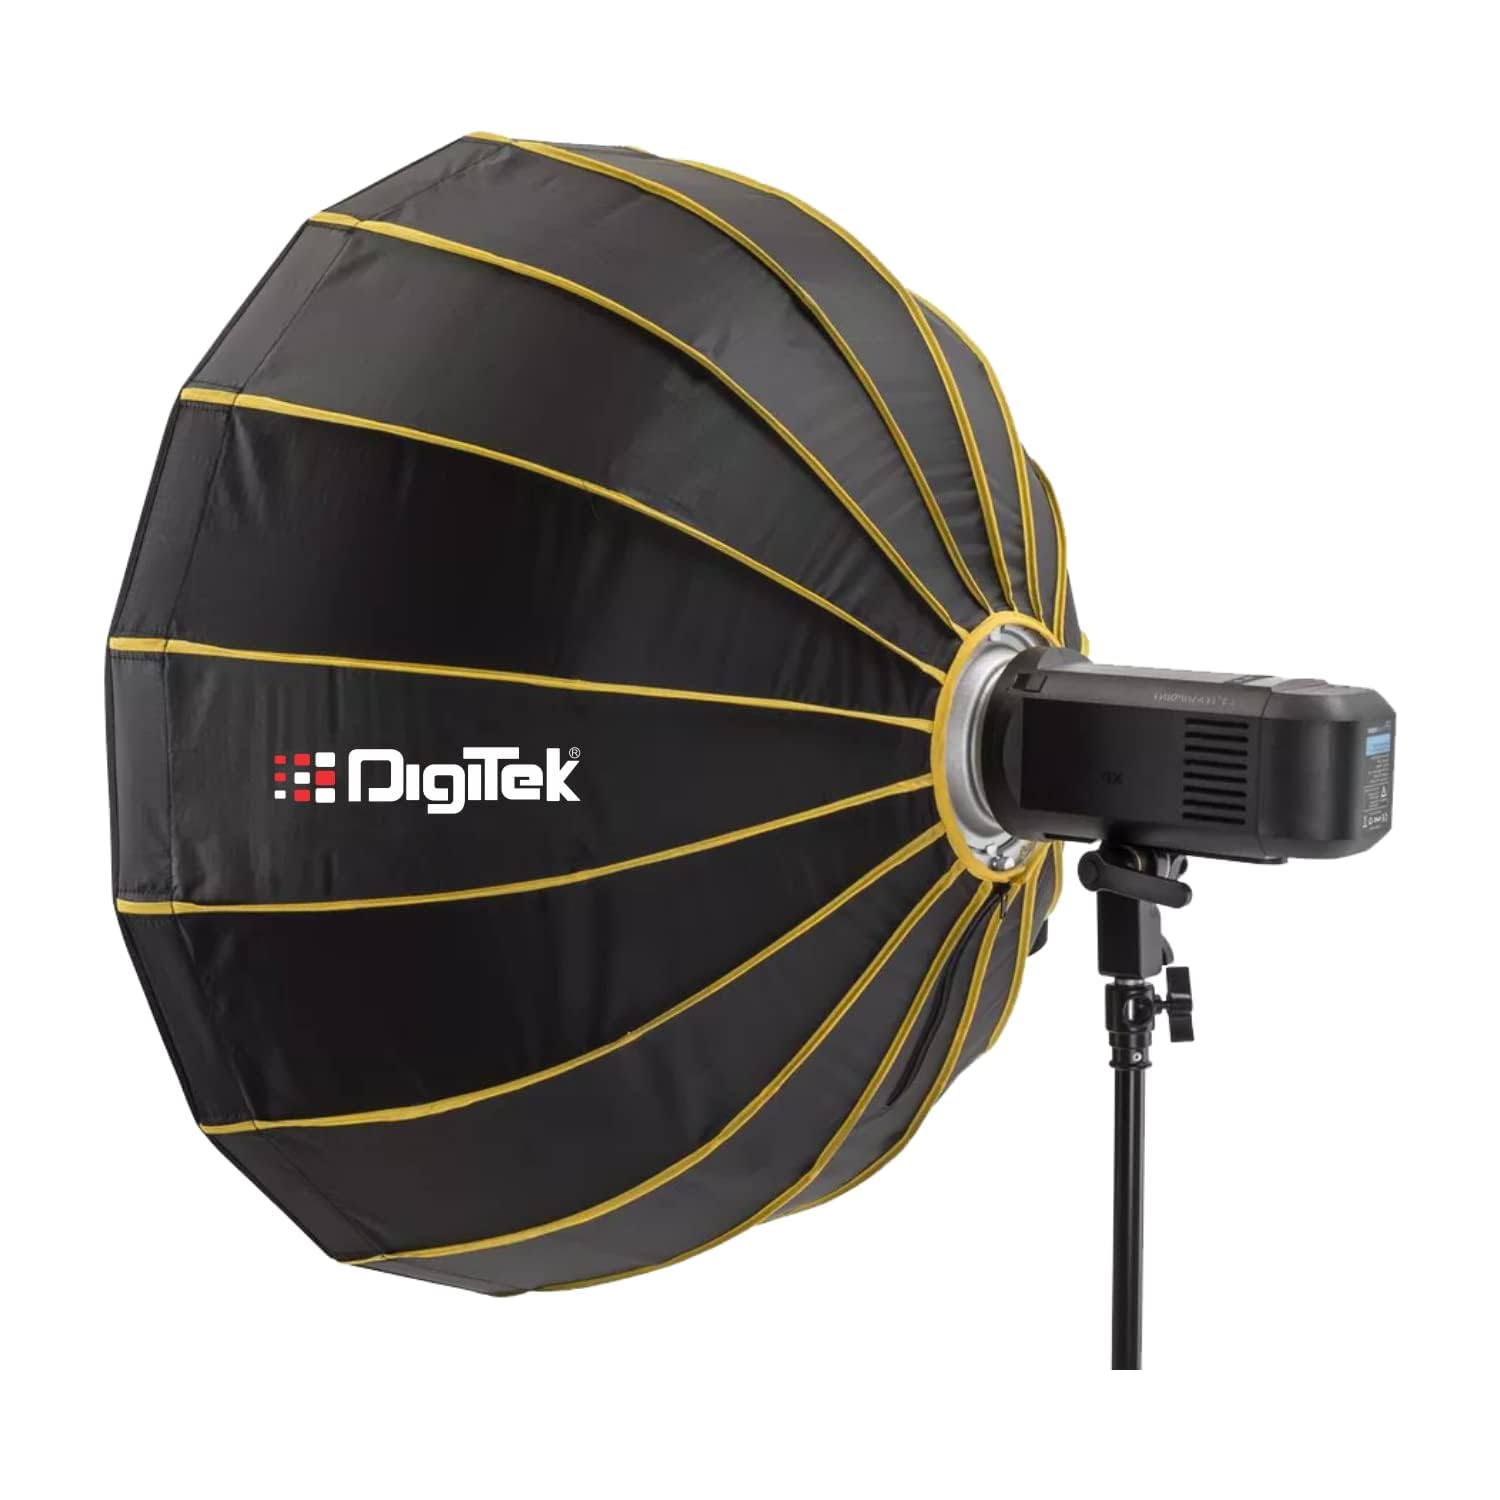 Digitek DBDS-65W 65cm Beauty Dish Softbox (White), Collapsible, Transportable, Lightweight Bowen Mount for Photography & Studio Lighting with Removable Diffuser